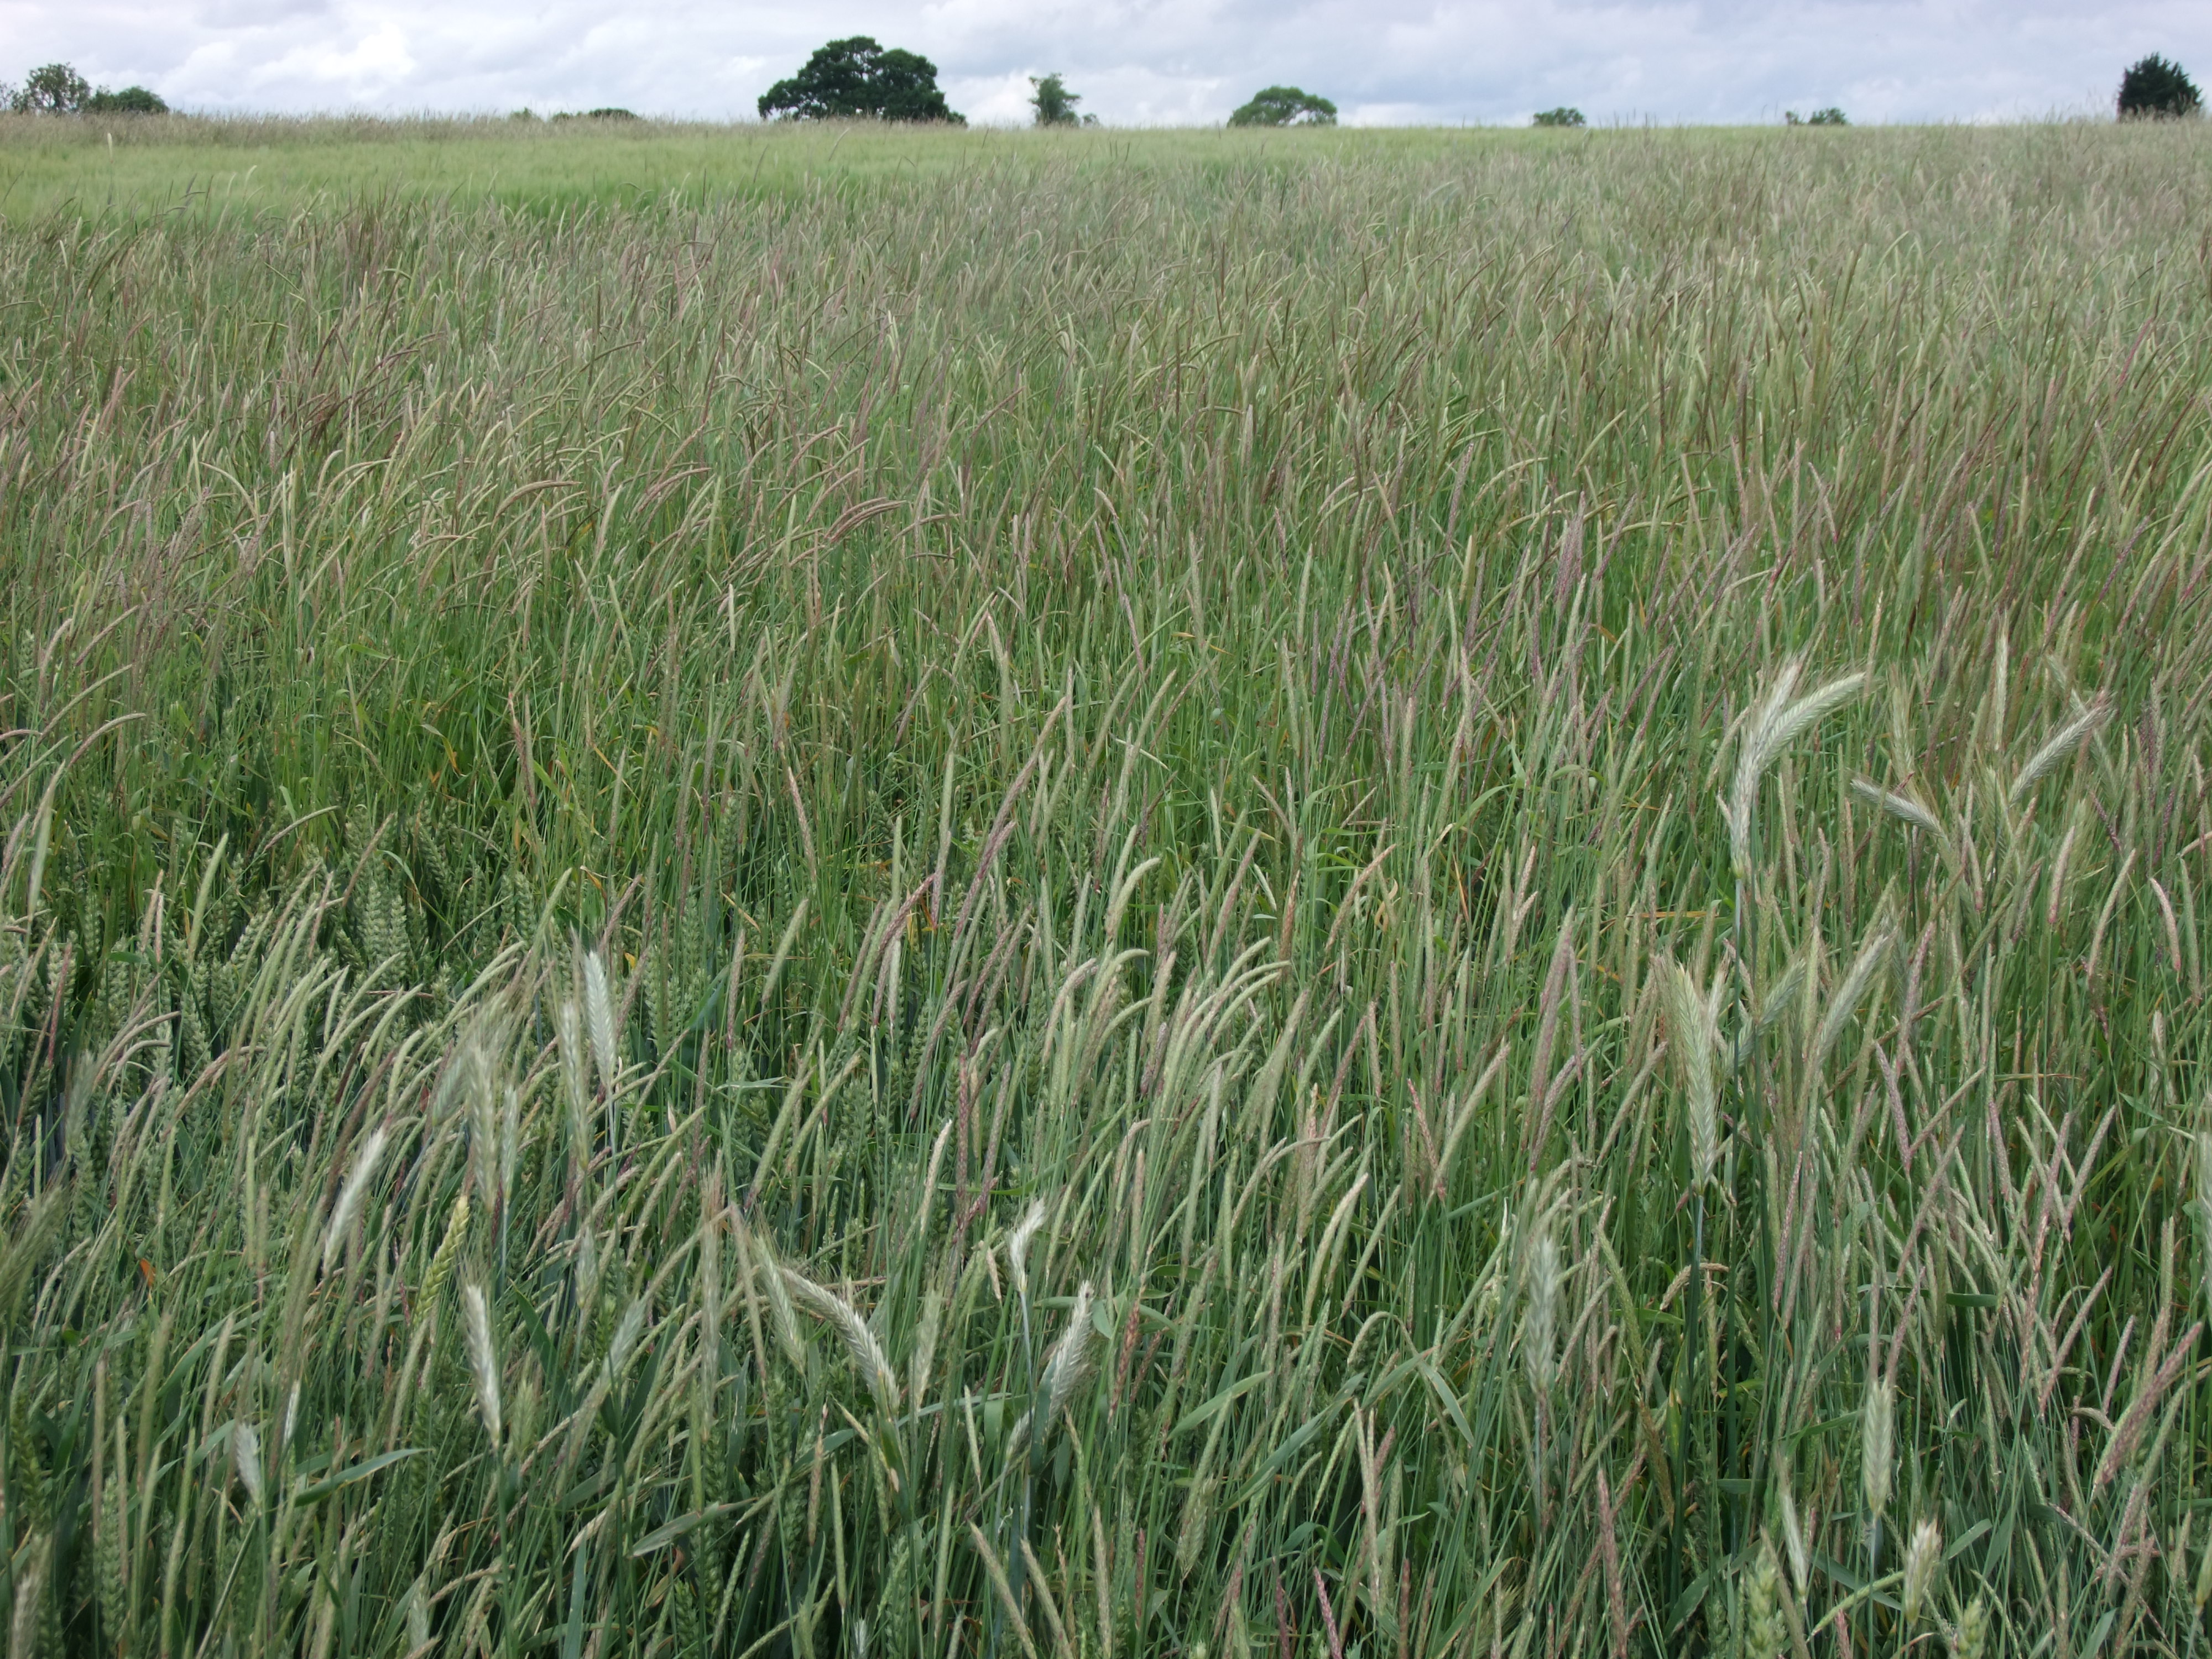 The blackgrass had been reduced to low enough levels in the first wheat for a successful crop, but the second wheat was stuffed with blackgrass.